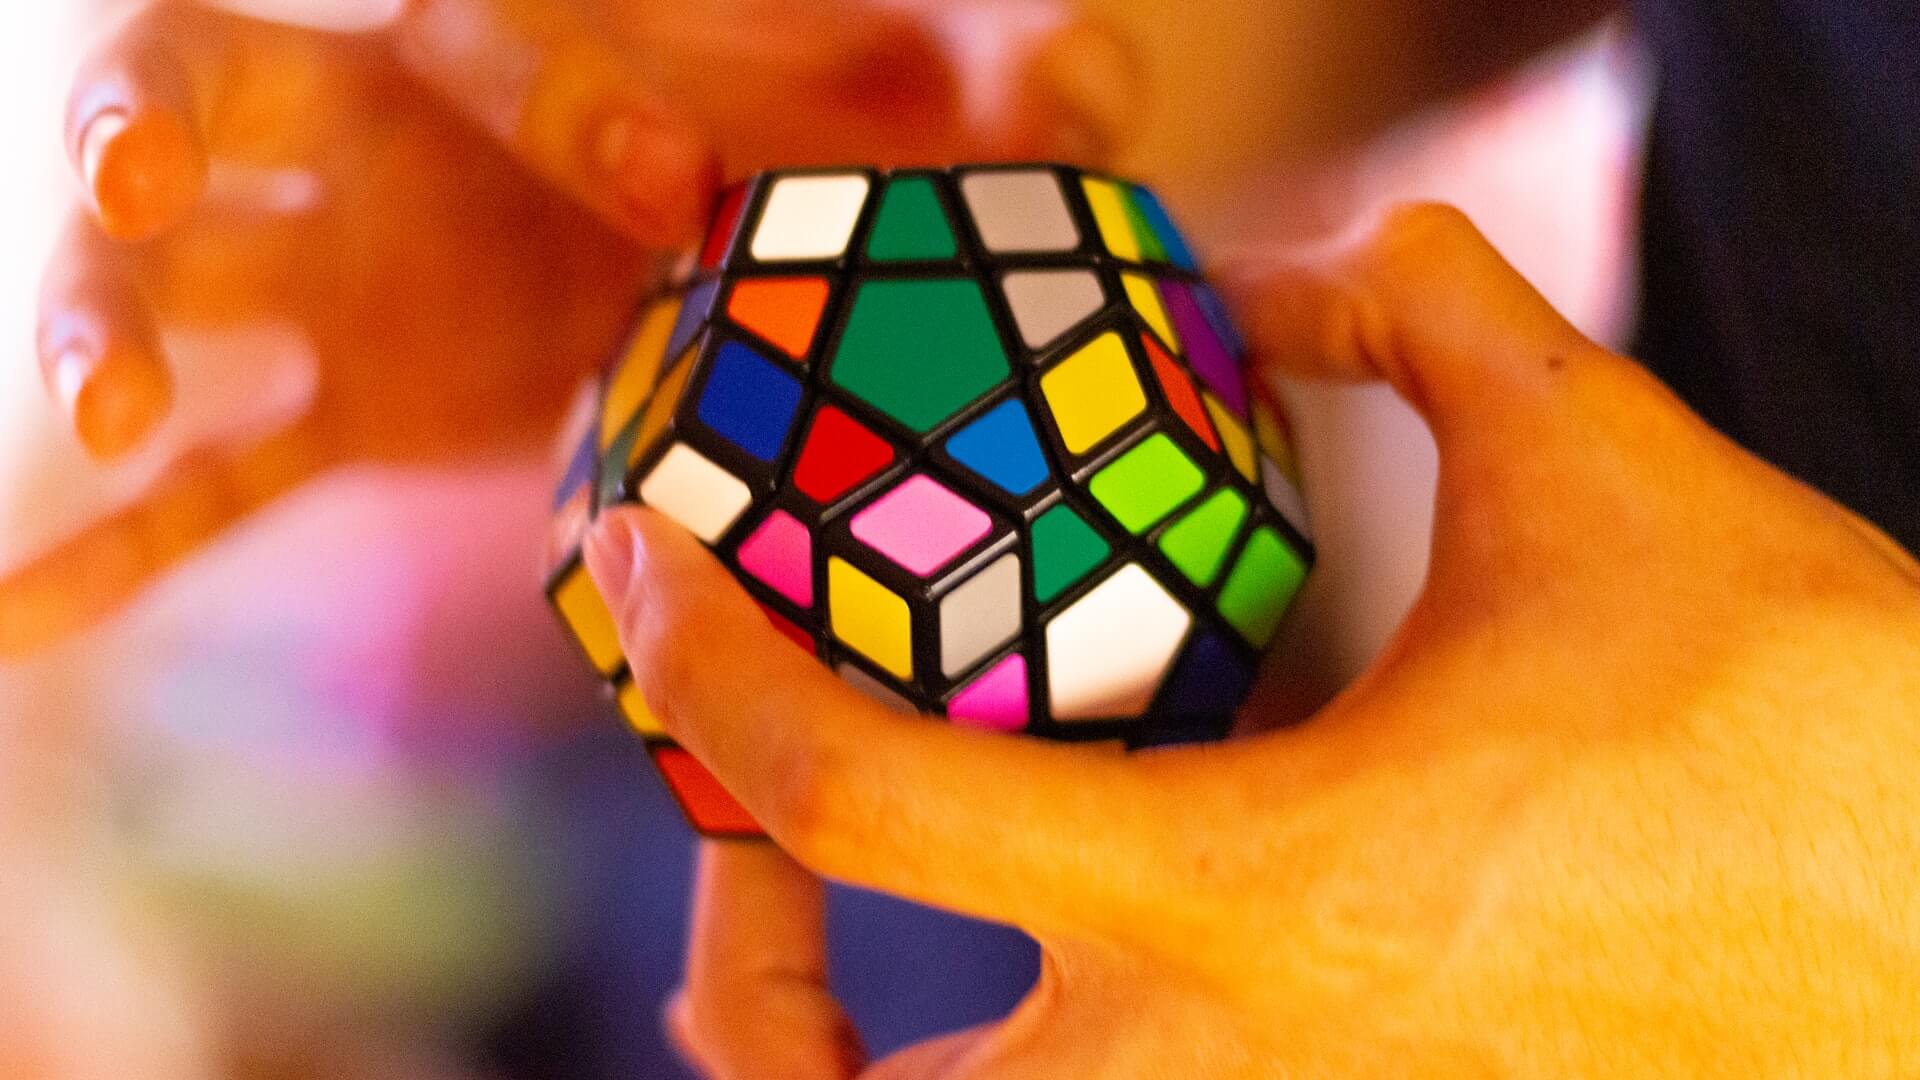 A megaminx - another model of a Rubik's cube